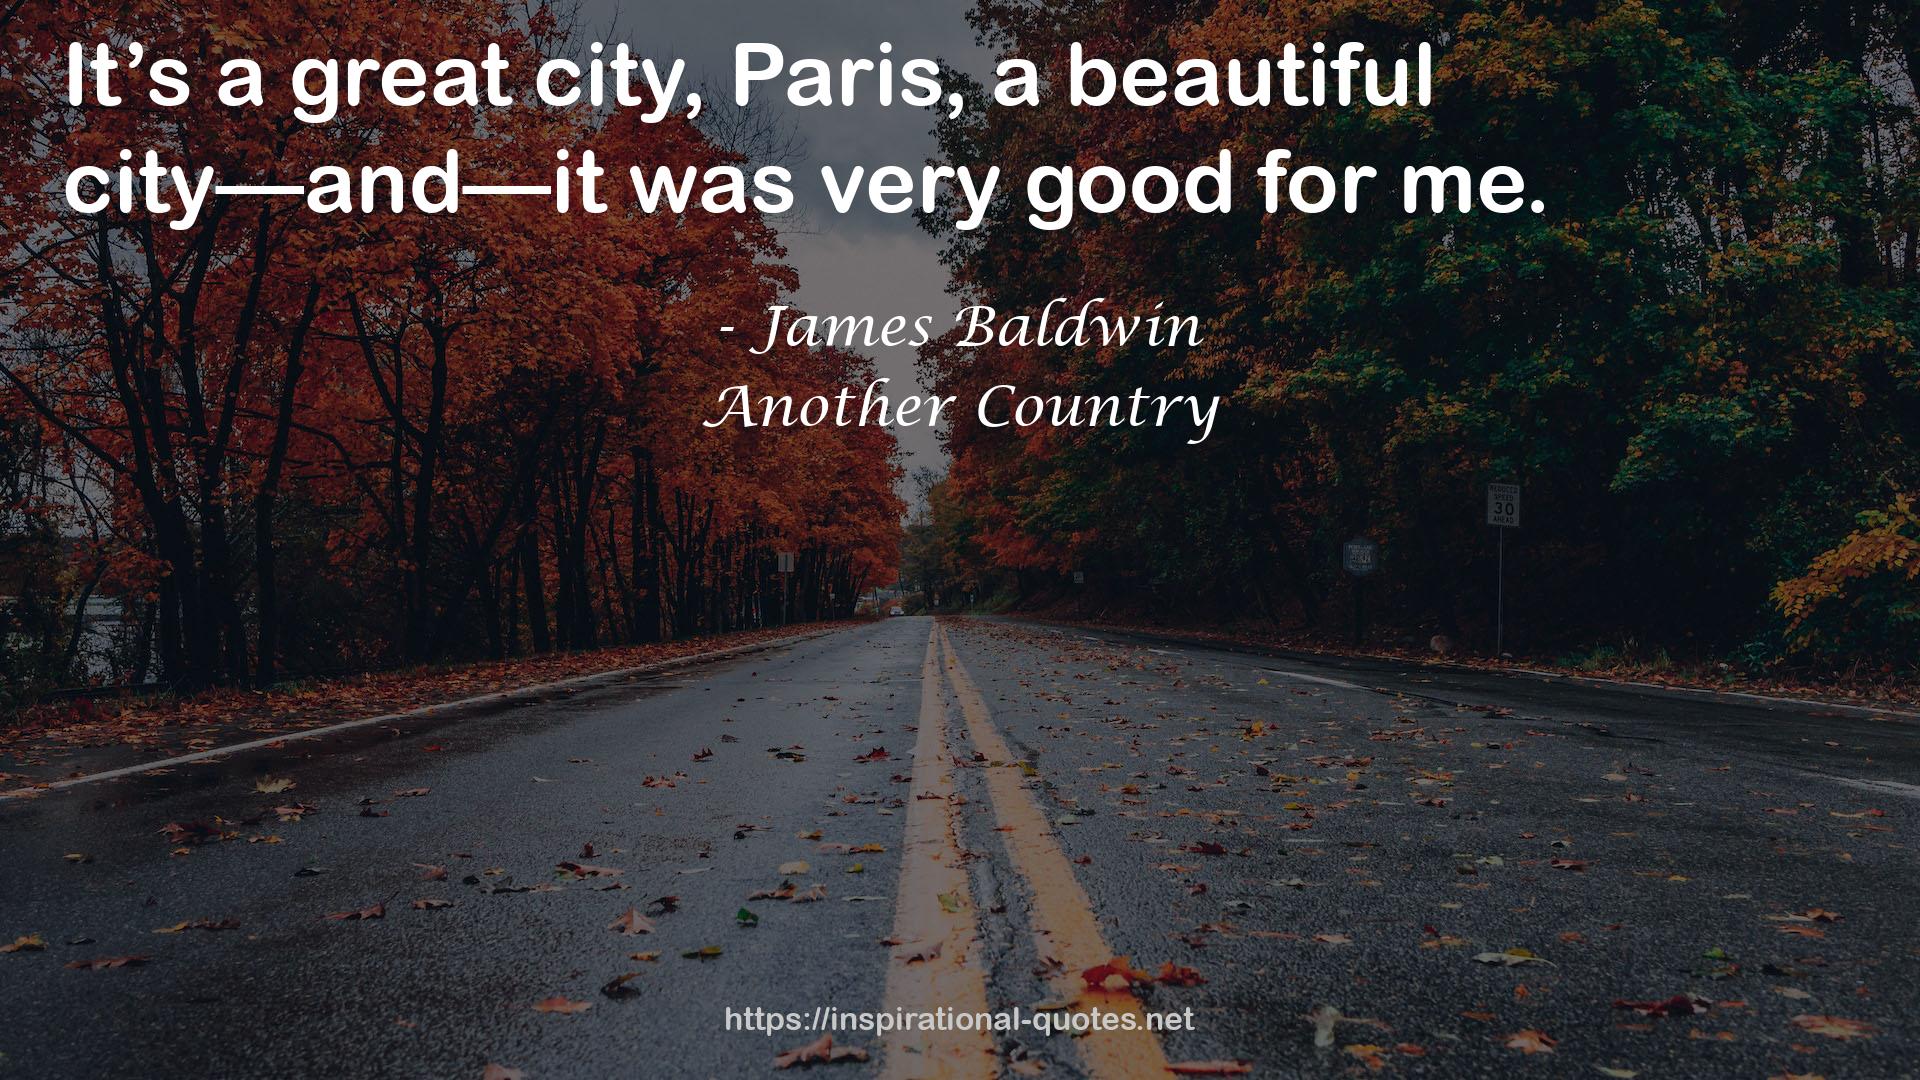 a beautiful city––and––it  QUOTES